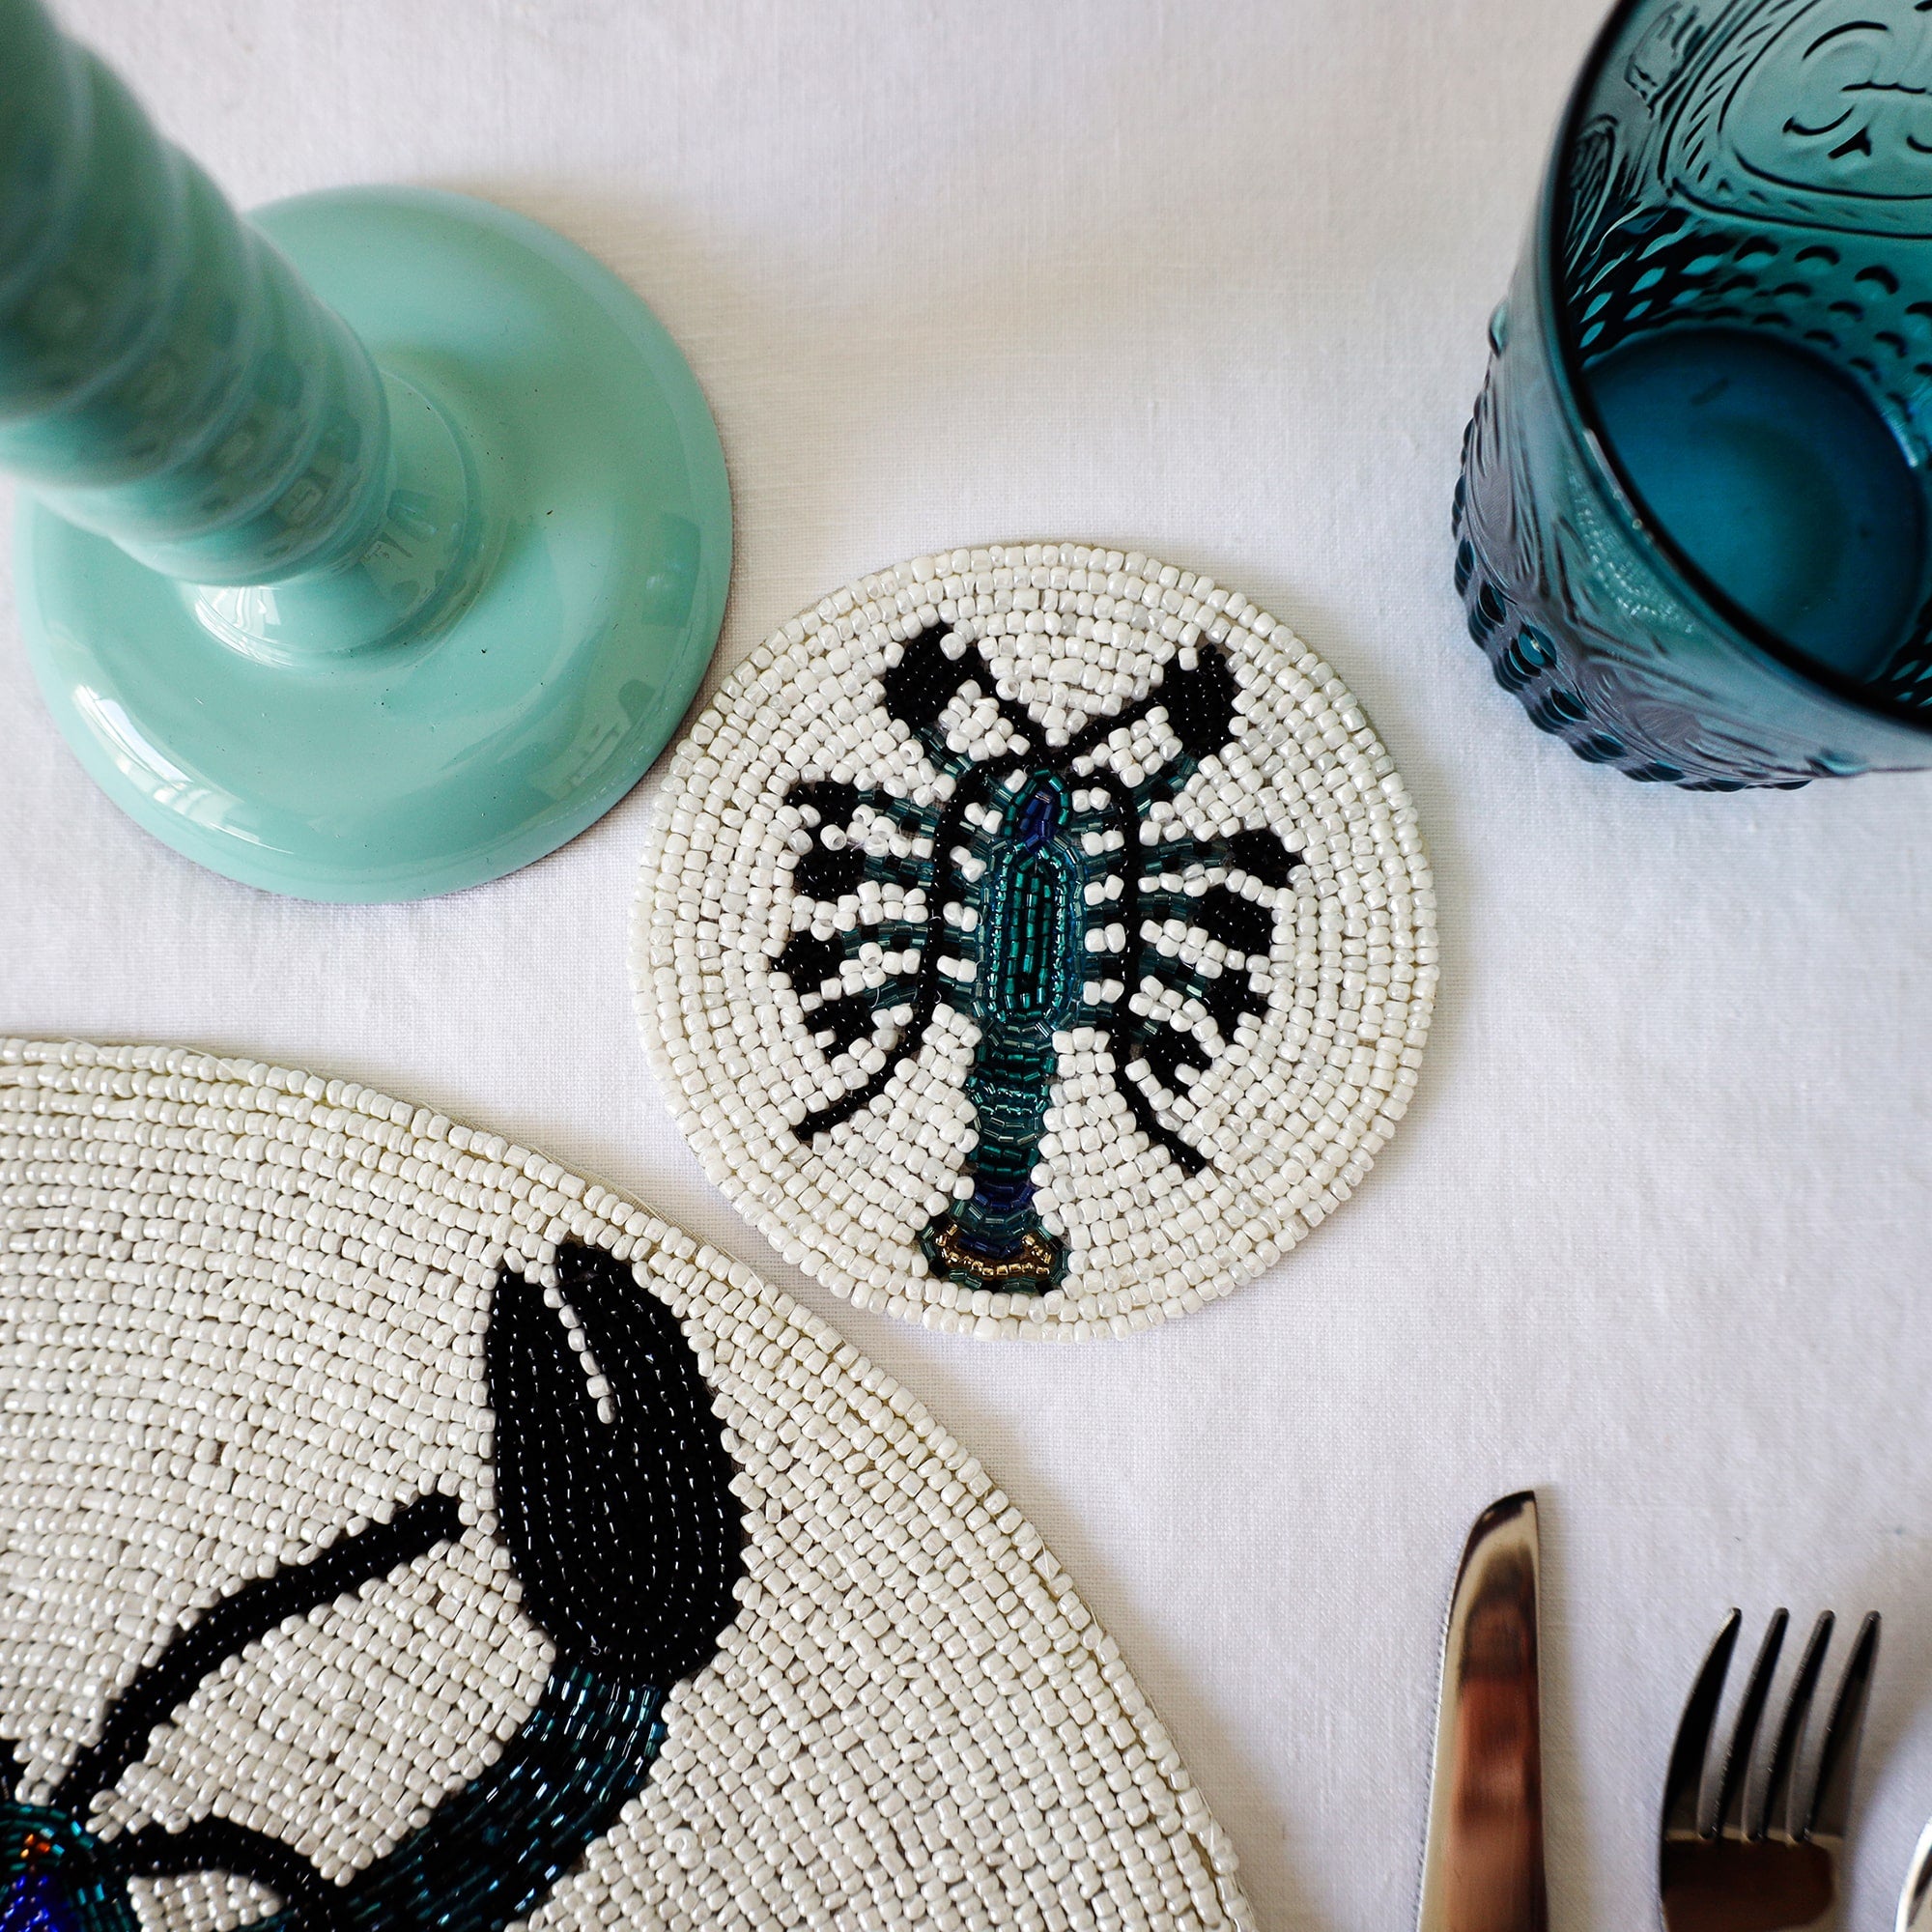 Handmade glass beaded coaster with a lobster design  next to a matching placemat on a table setting with glasses,cutlery and a candlestick